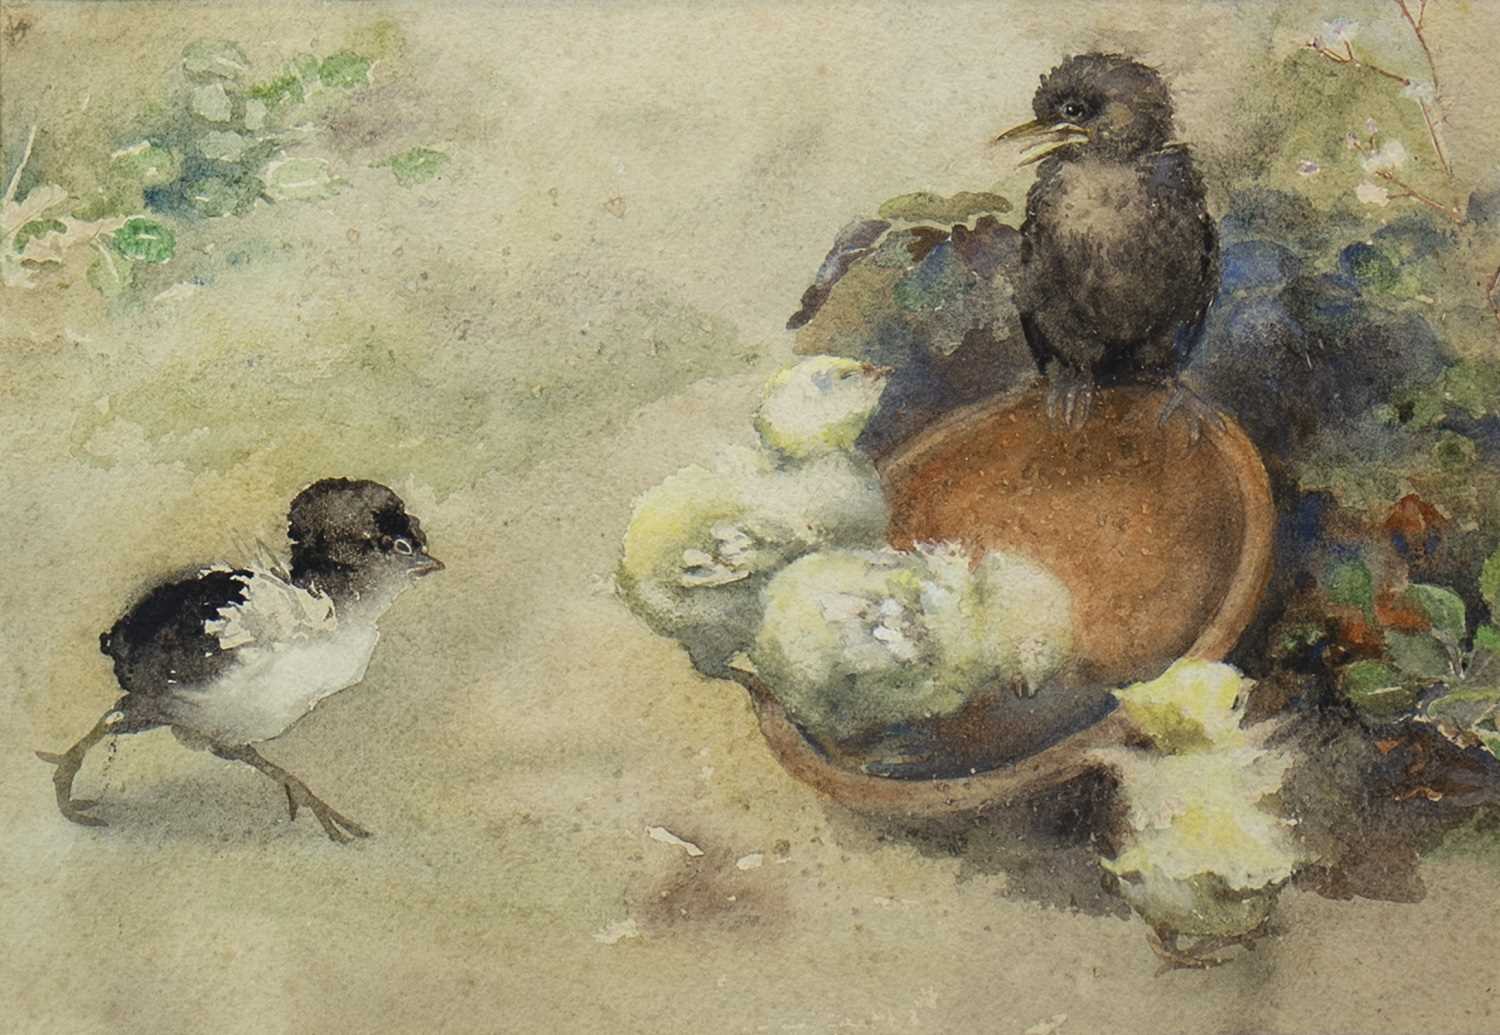 Lot 614 - CHICKS, A WATERCOLOUR ATTRIBUTED TO NELLIE ELLEN HARVEY